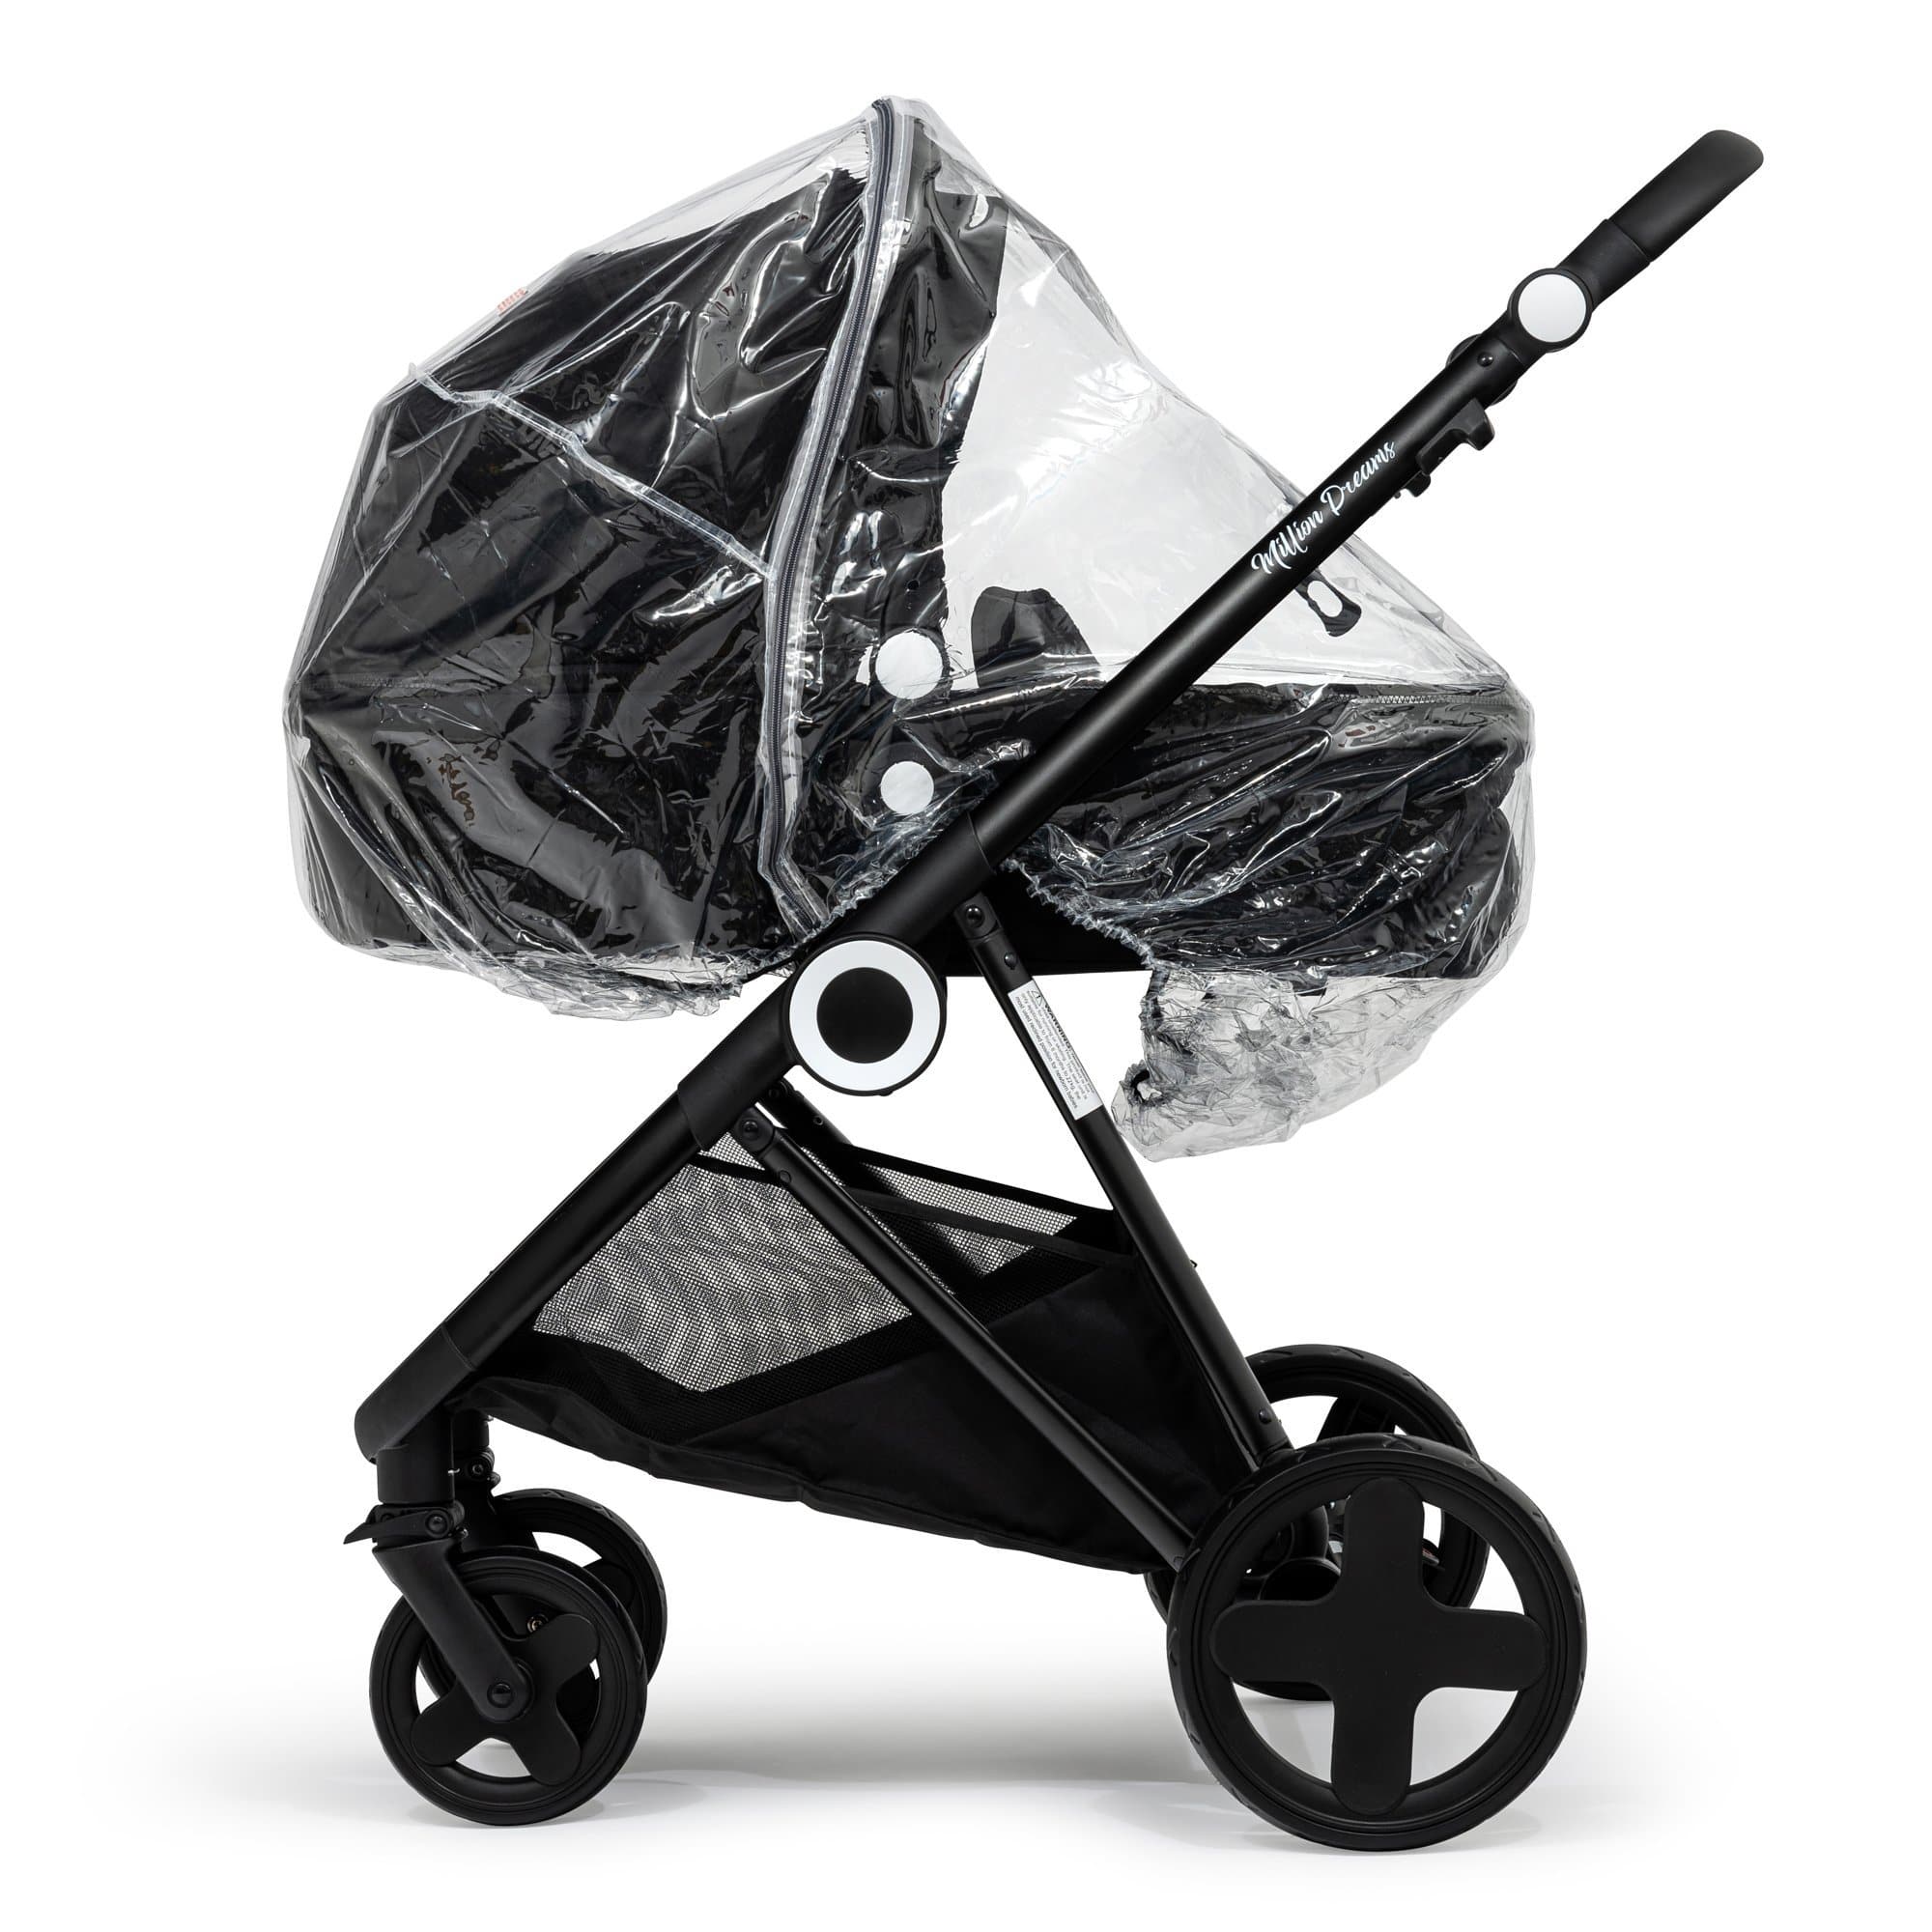 2 in 1 Rain Cover Compatible With Egg - Fits All Models - For Your Little One